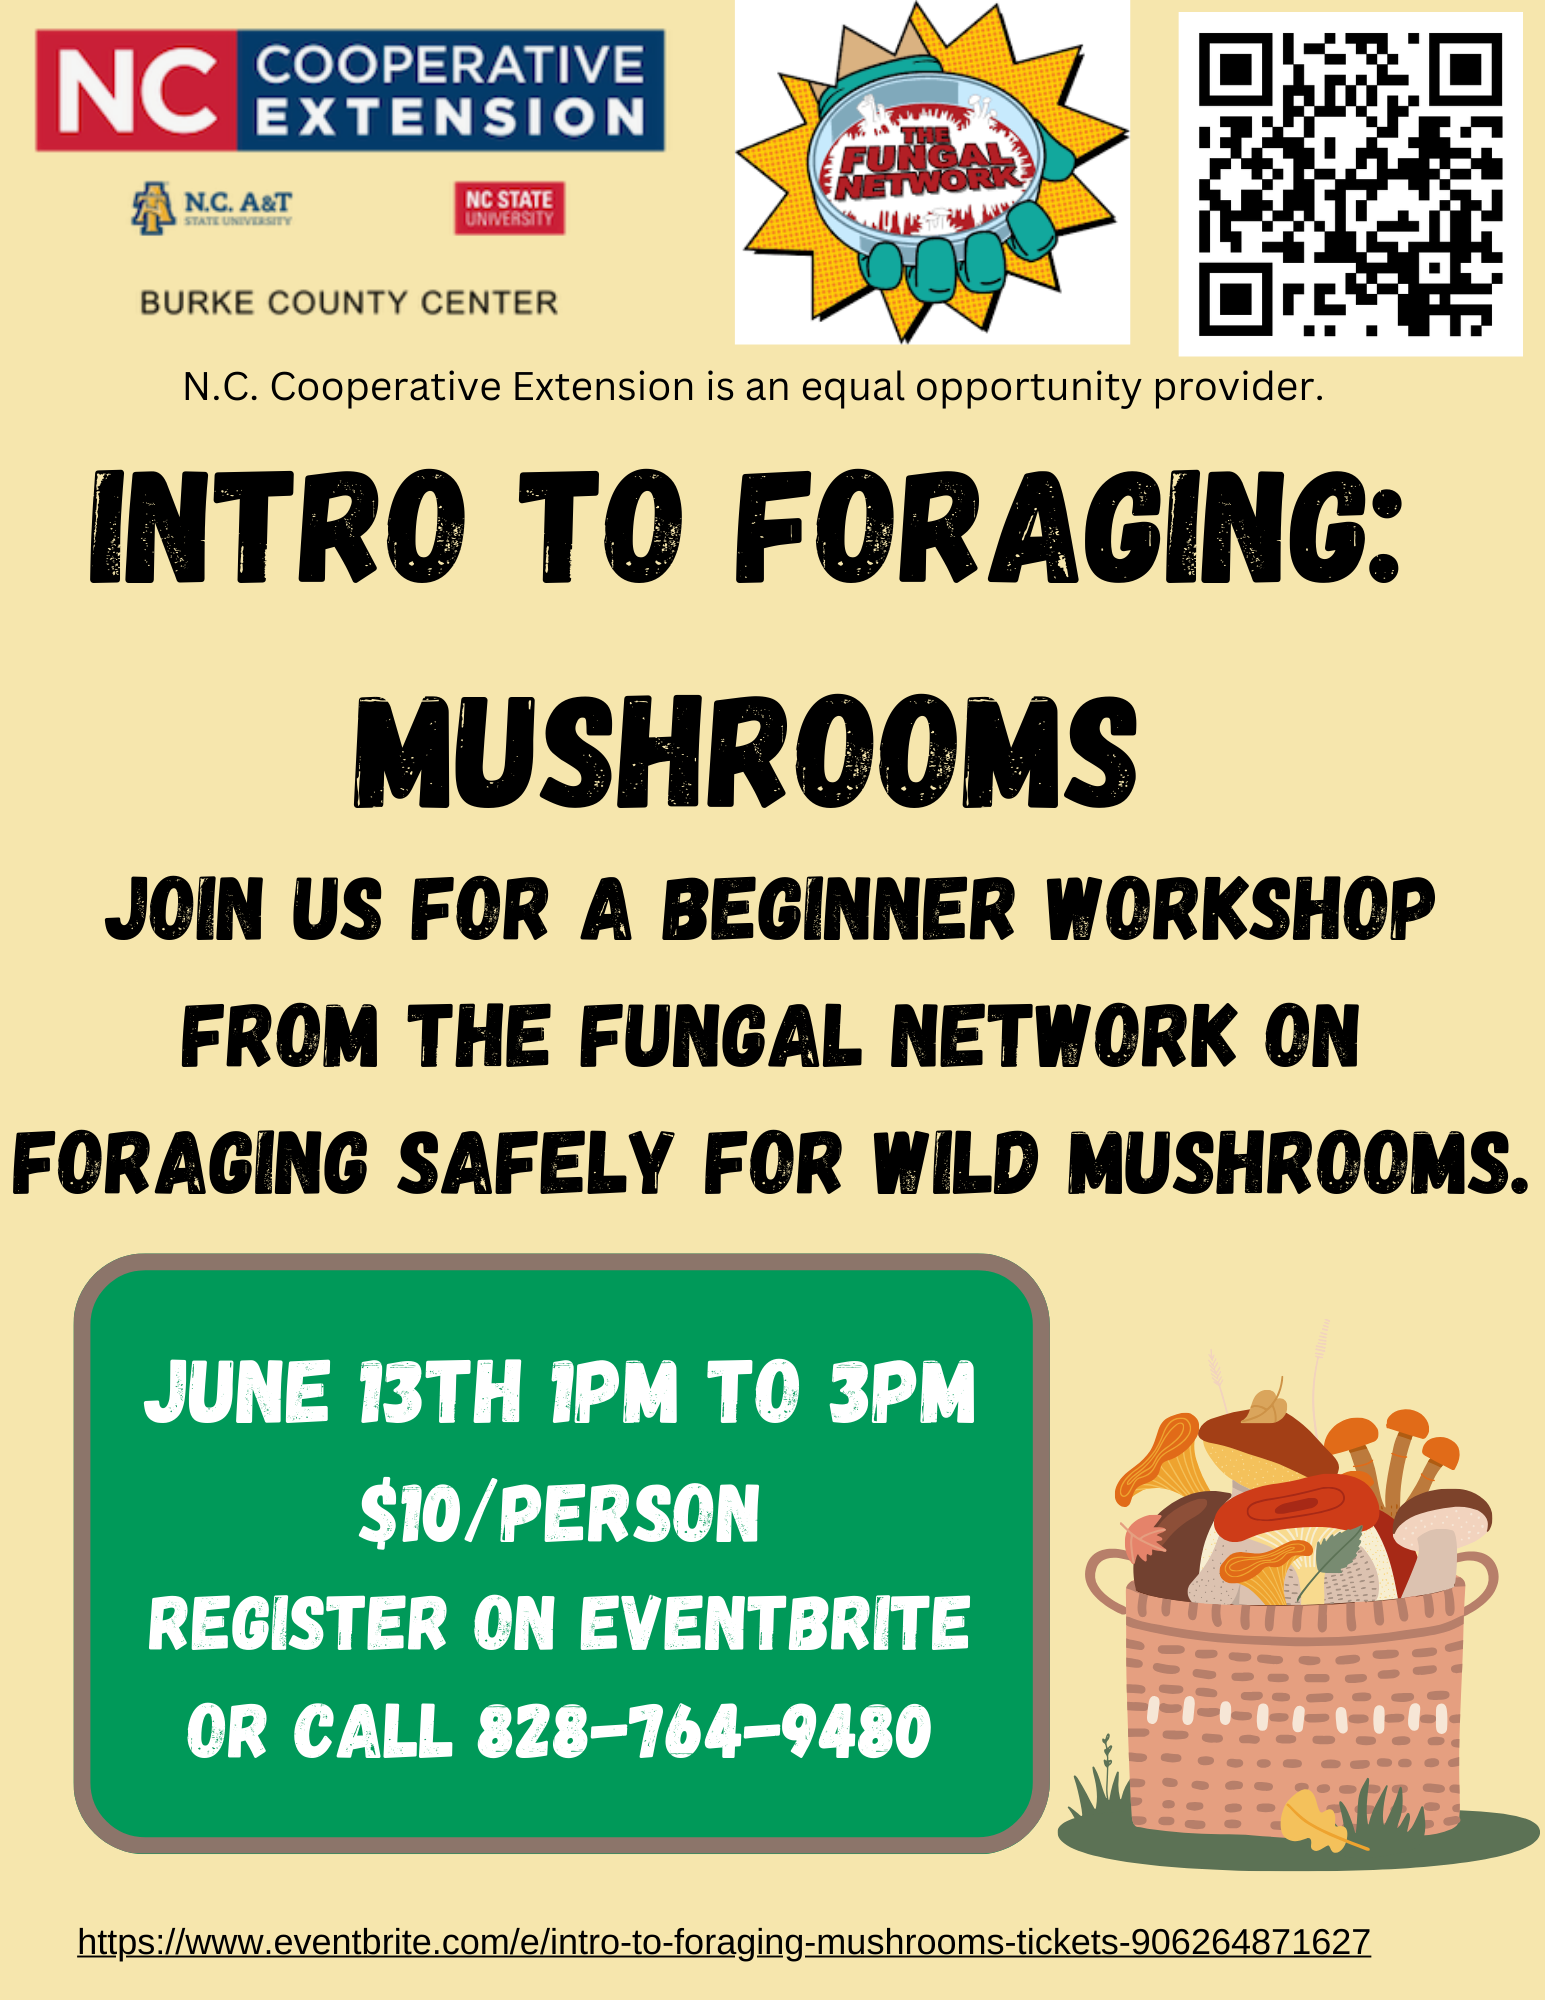 Intro to foraging: Mushrooms flyer